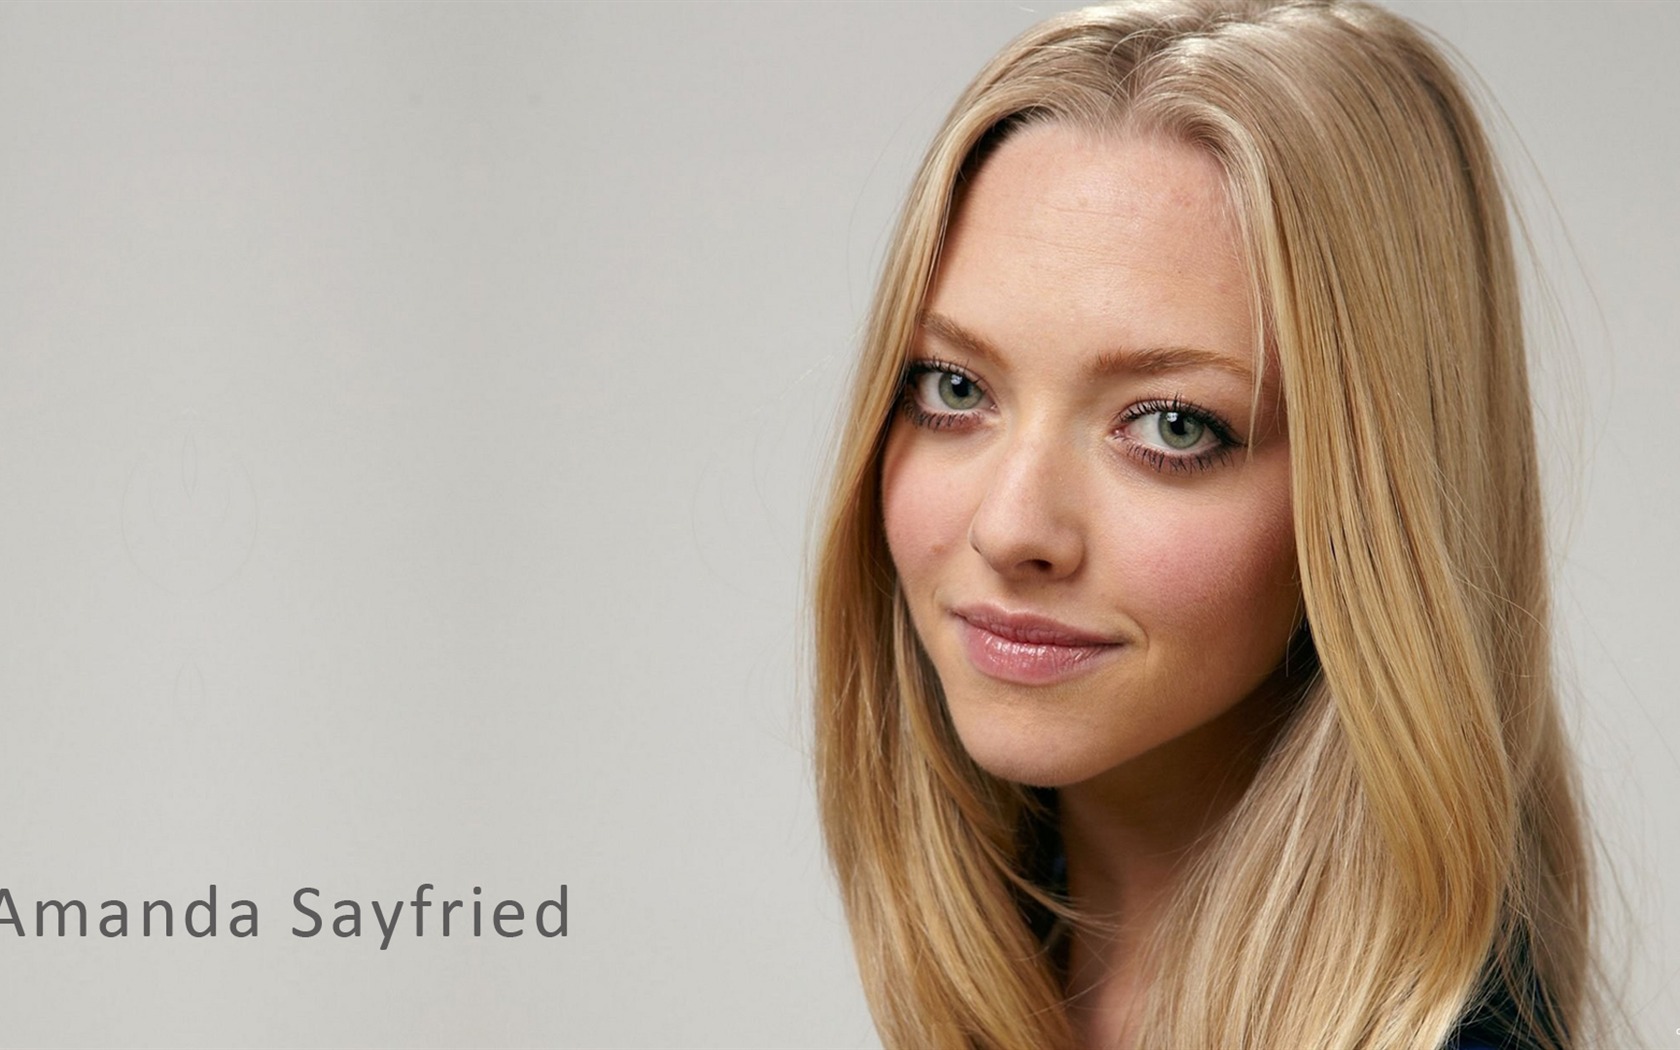 Amanda Seyfried #014 - 1680x1050 Wallpapers Pictures Photos Images